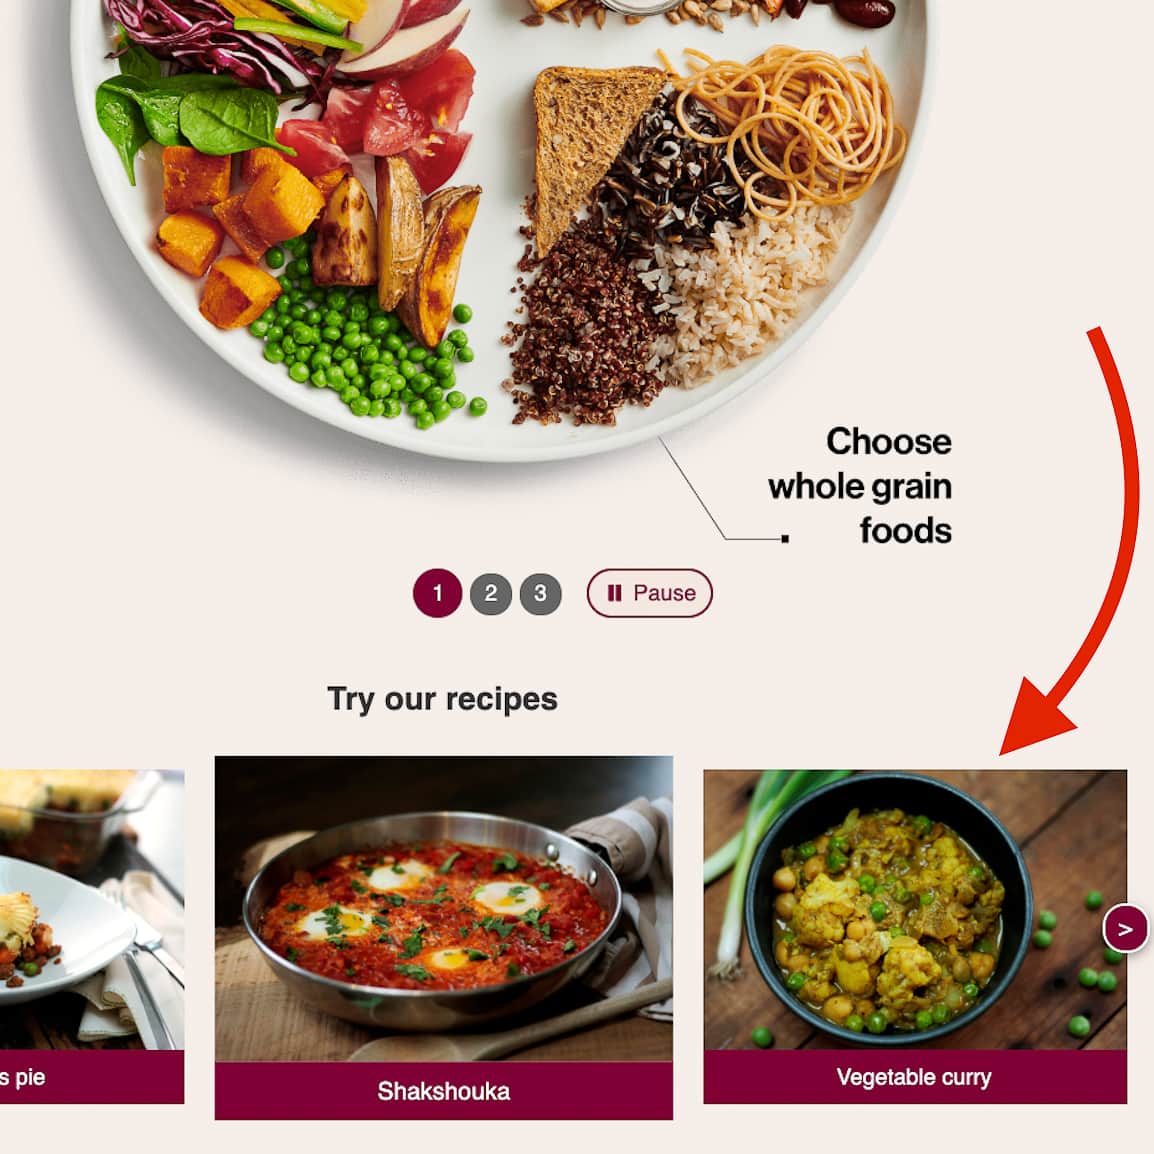 Canada's Food Guide plate with vegetables and grains with recipe images underneath